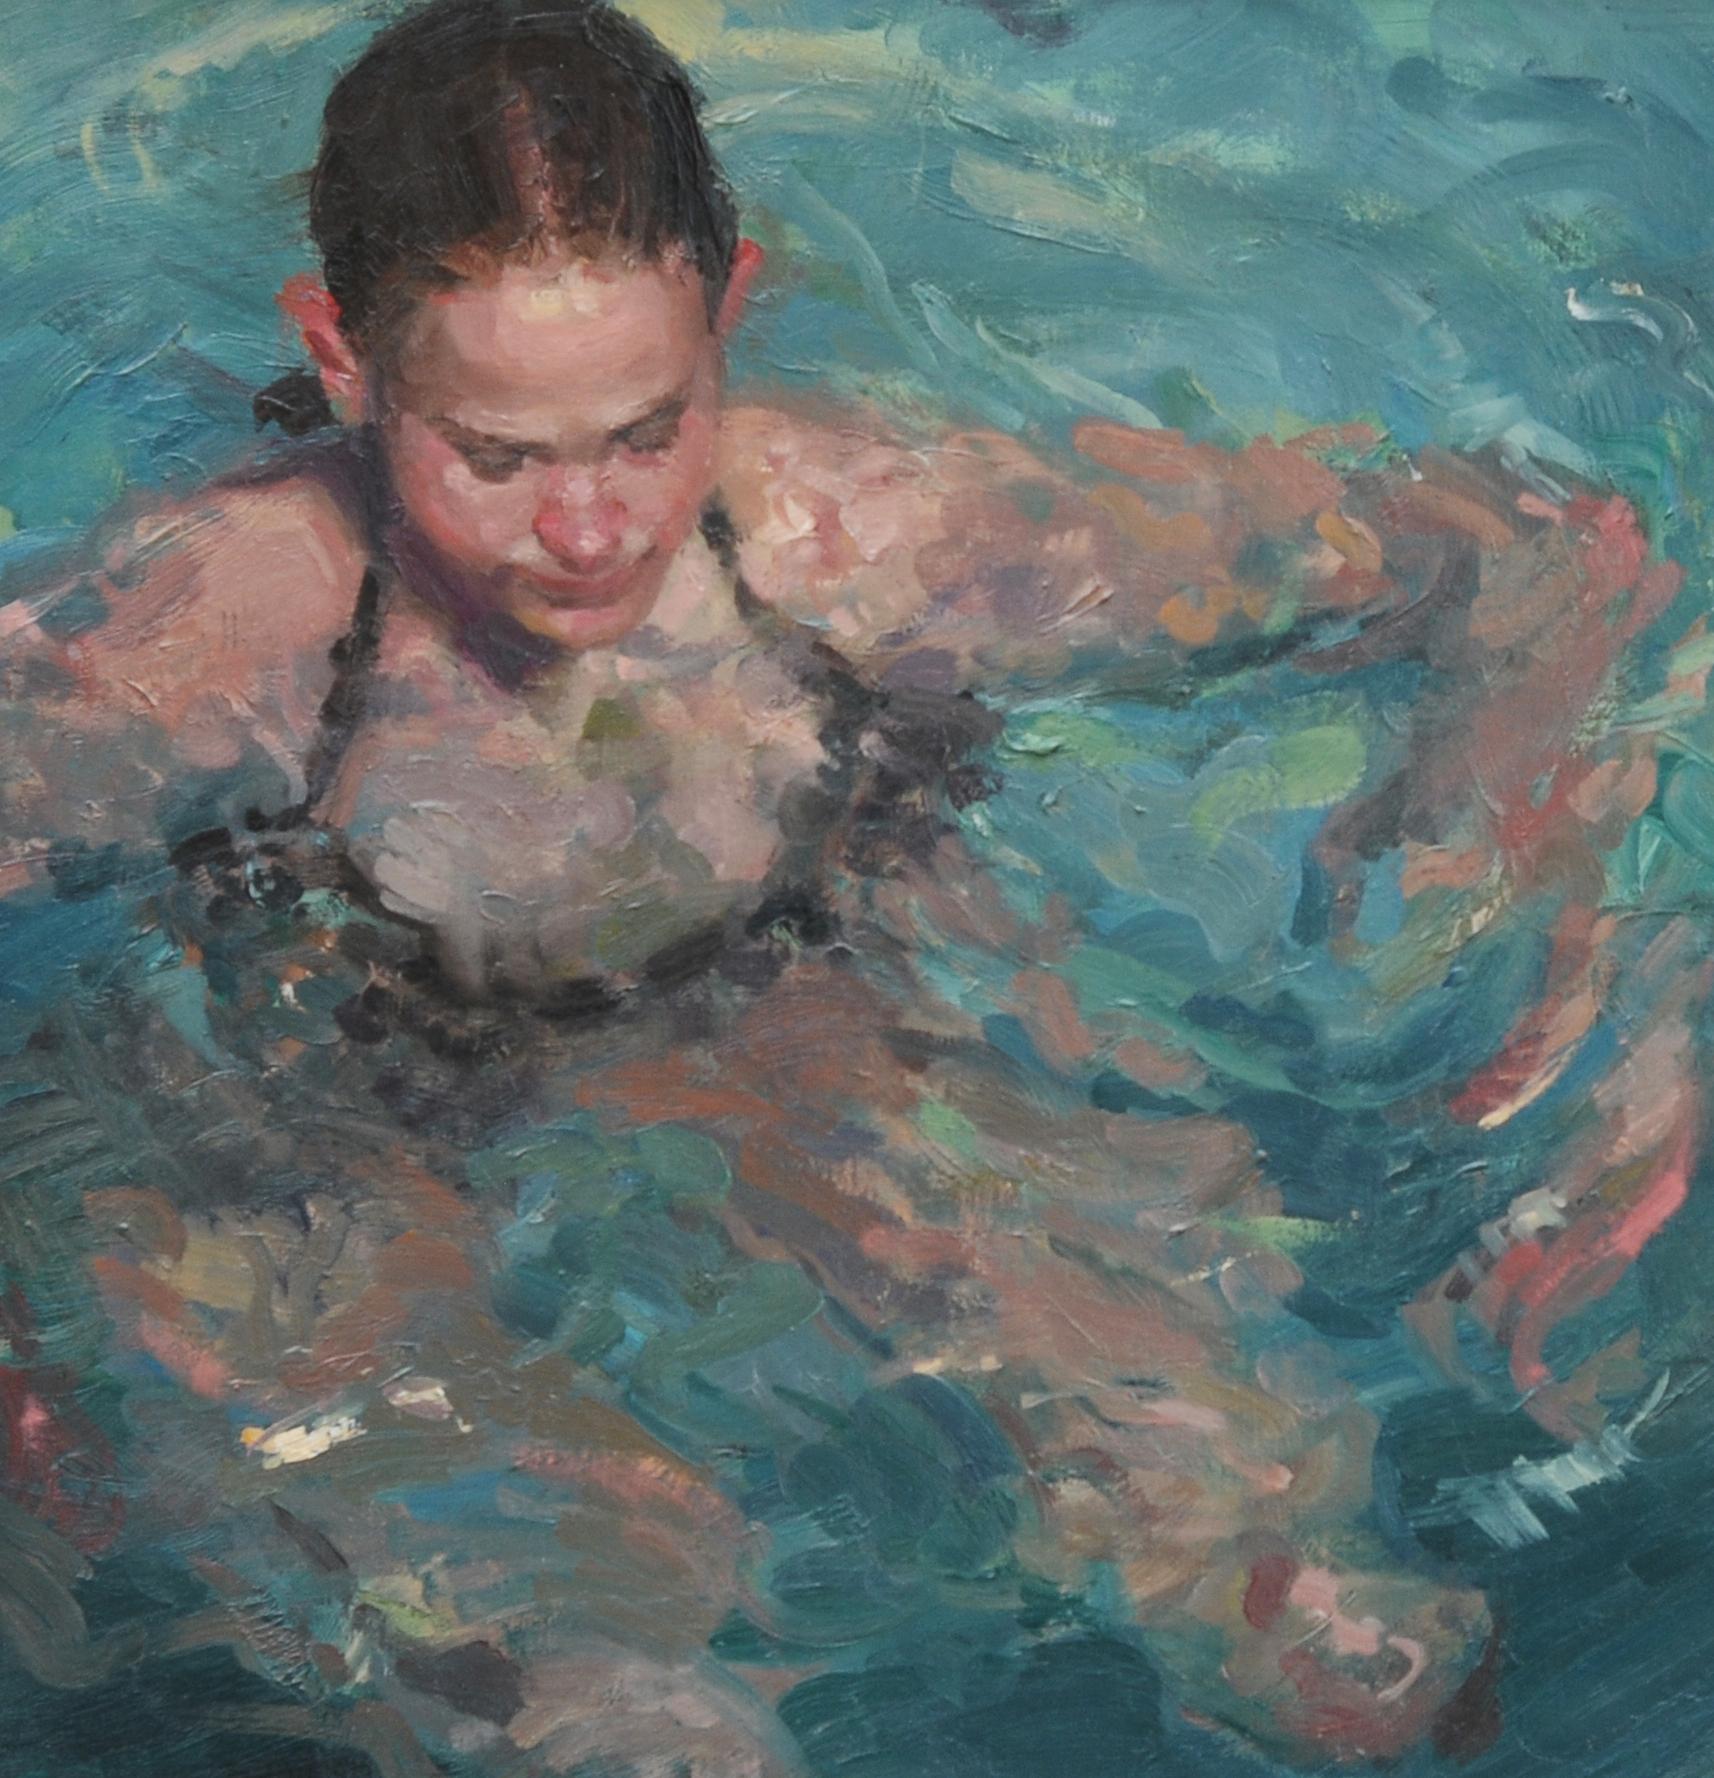 Rock Me Baby  Oil 14 x 20 Framed  Water Movement  Figurative Portraiture  - Impressionist Painting by E.Melinda Morrison